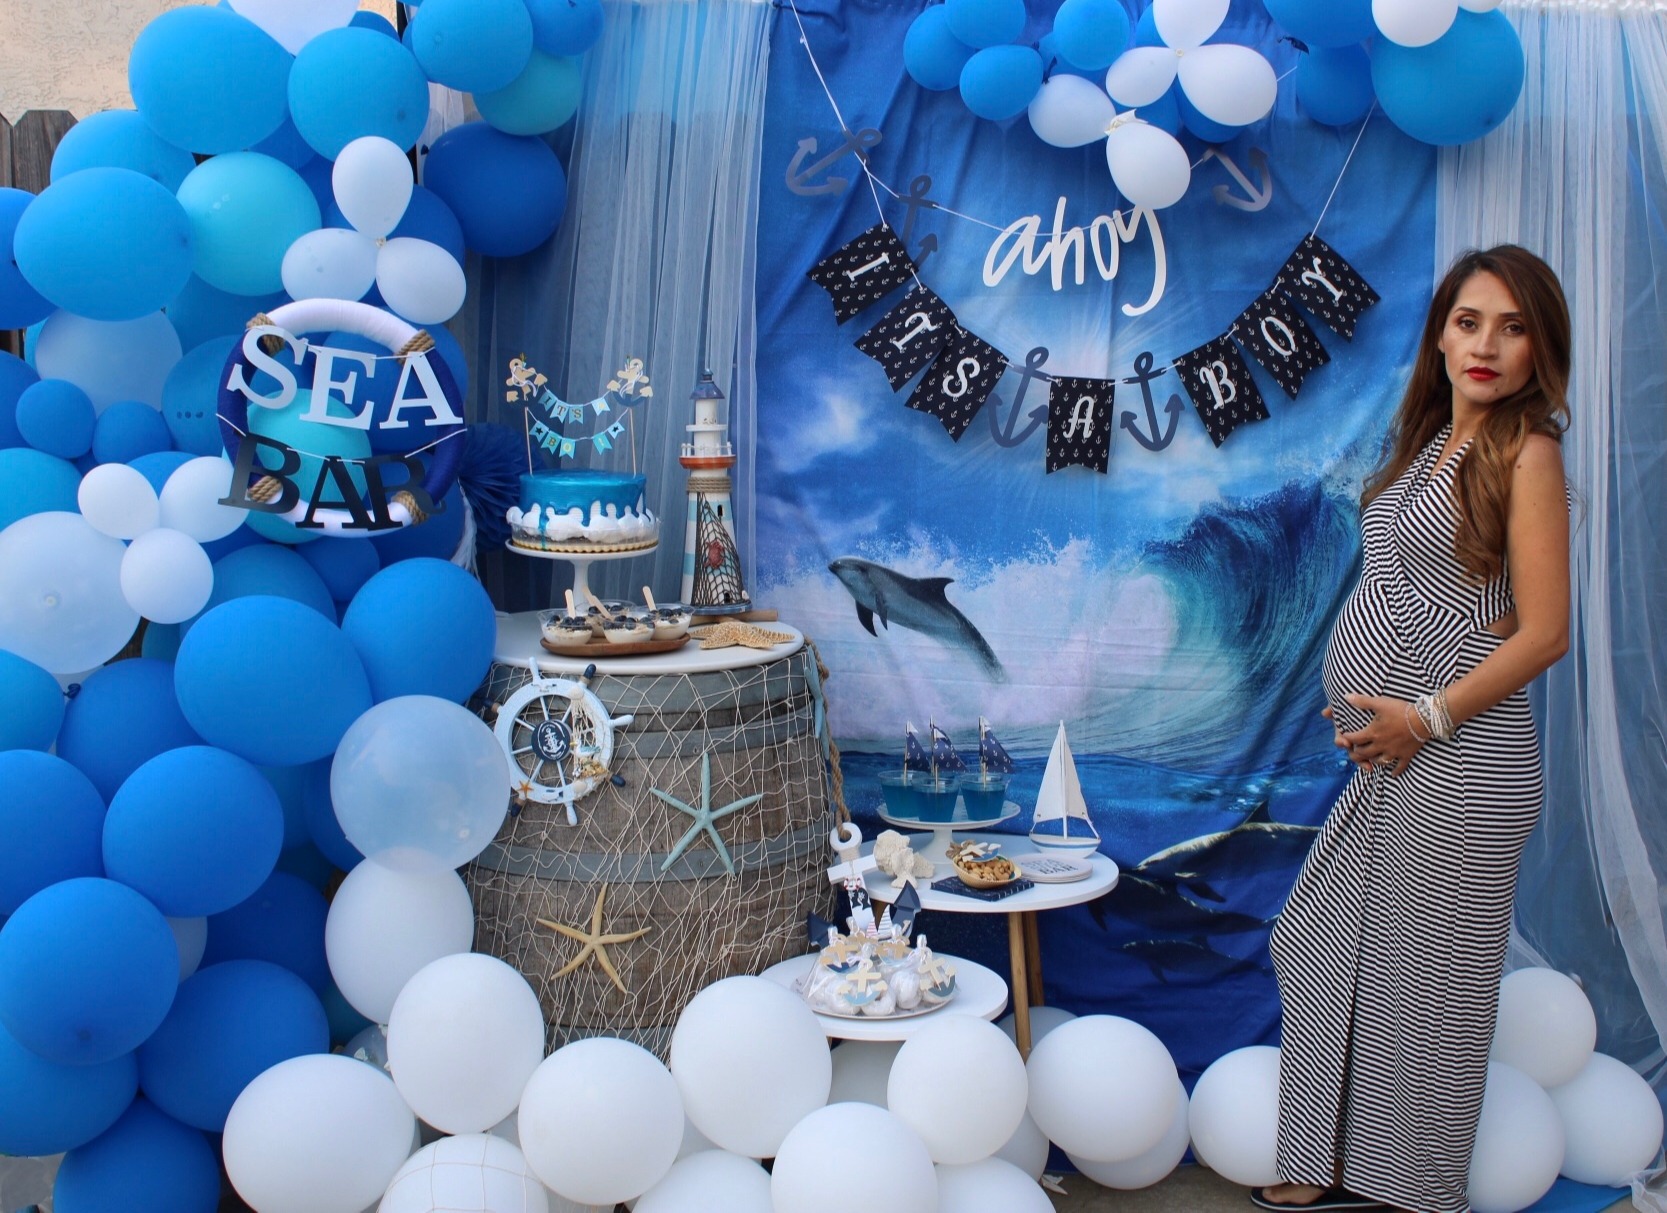 Ahoy its Boy! Nautical Baby Shower - Party Design, Styling and Decoration - North Bay California